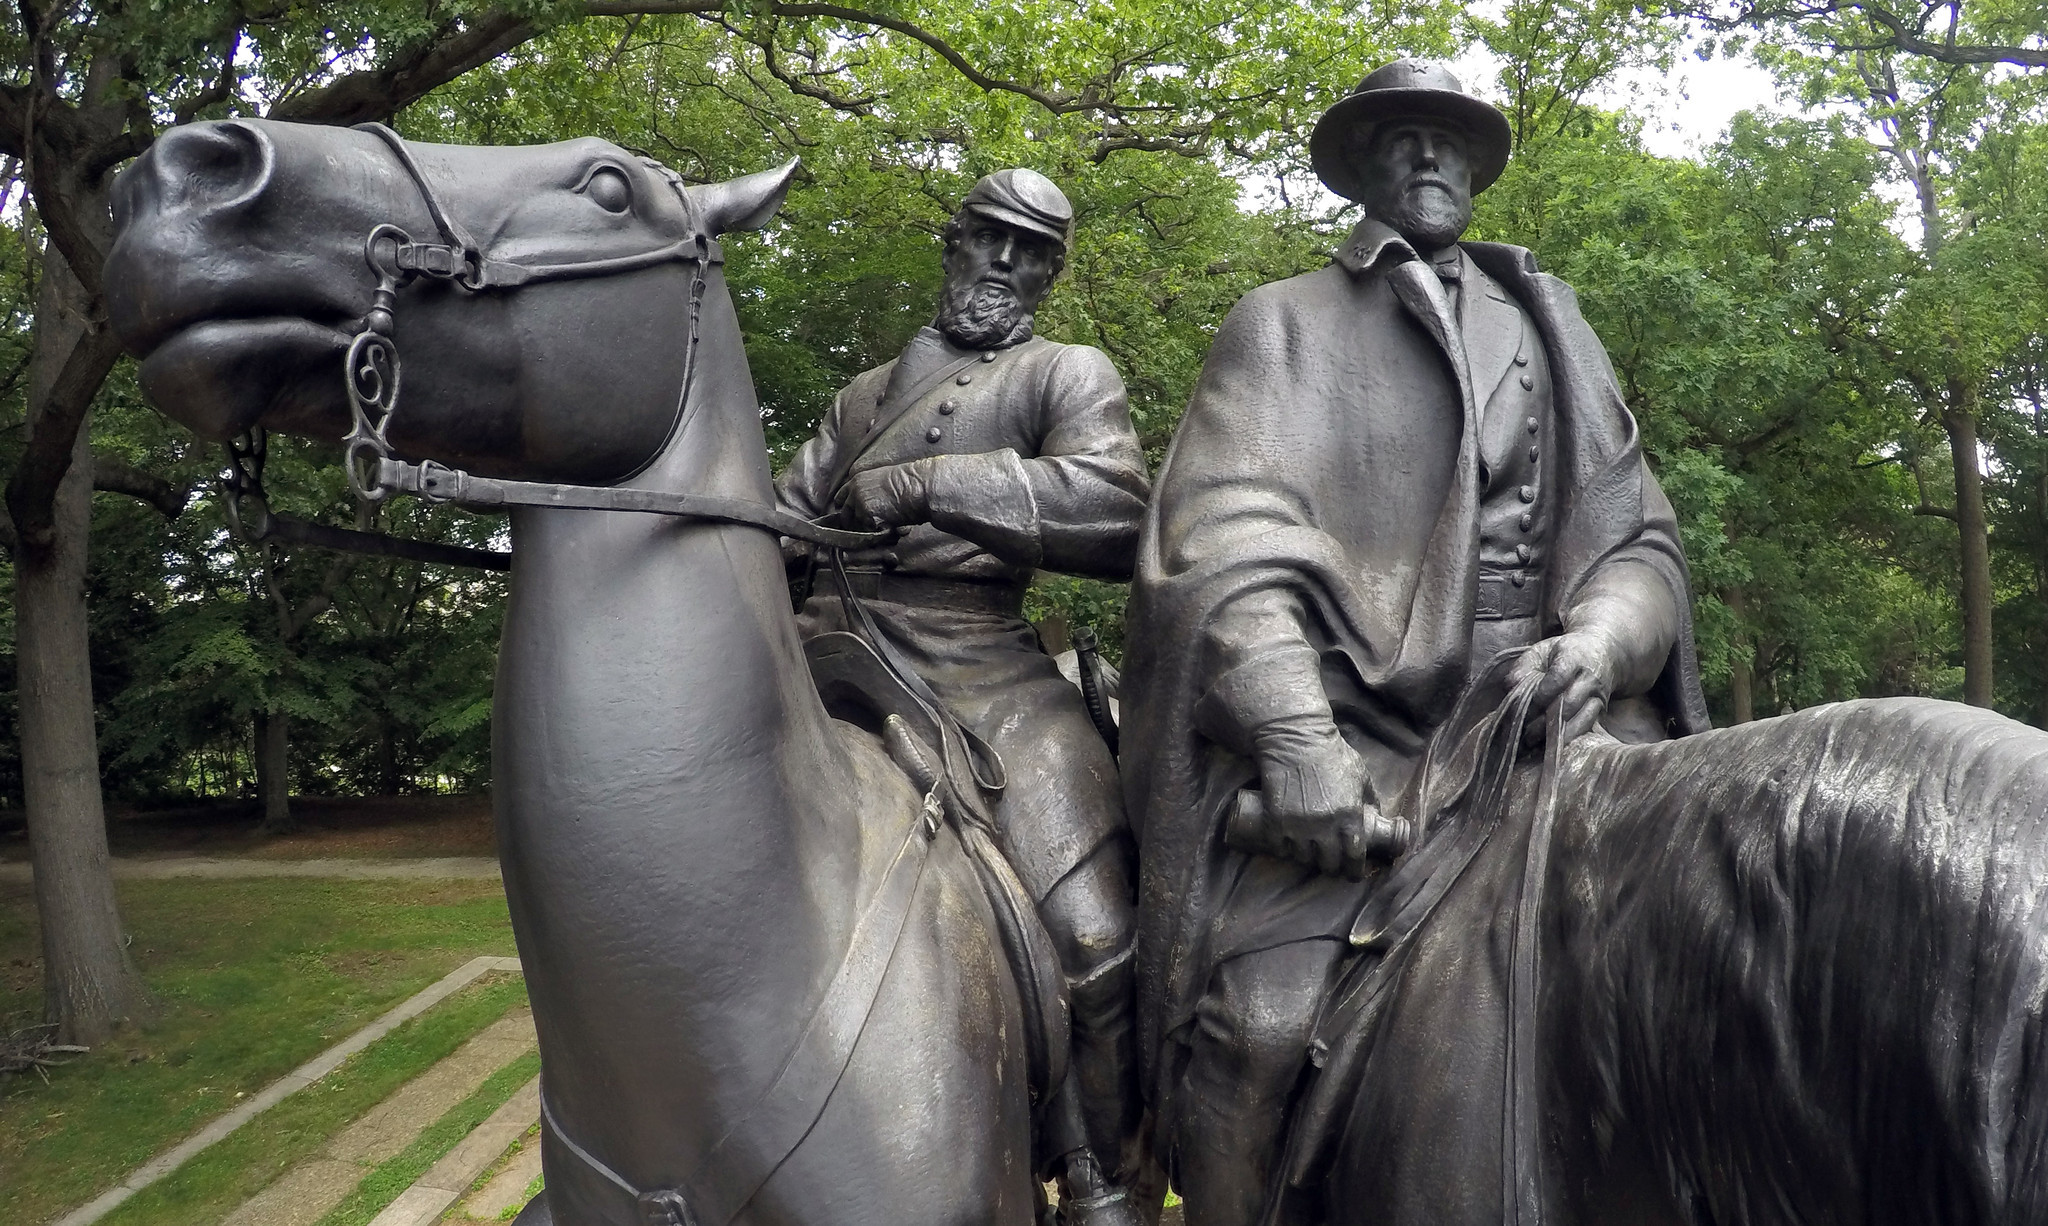 bs-md-ci-confederate-monuments-20160114